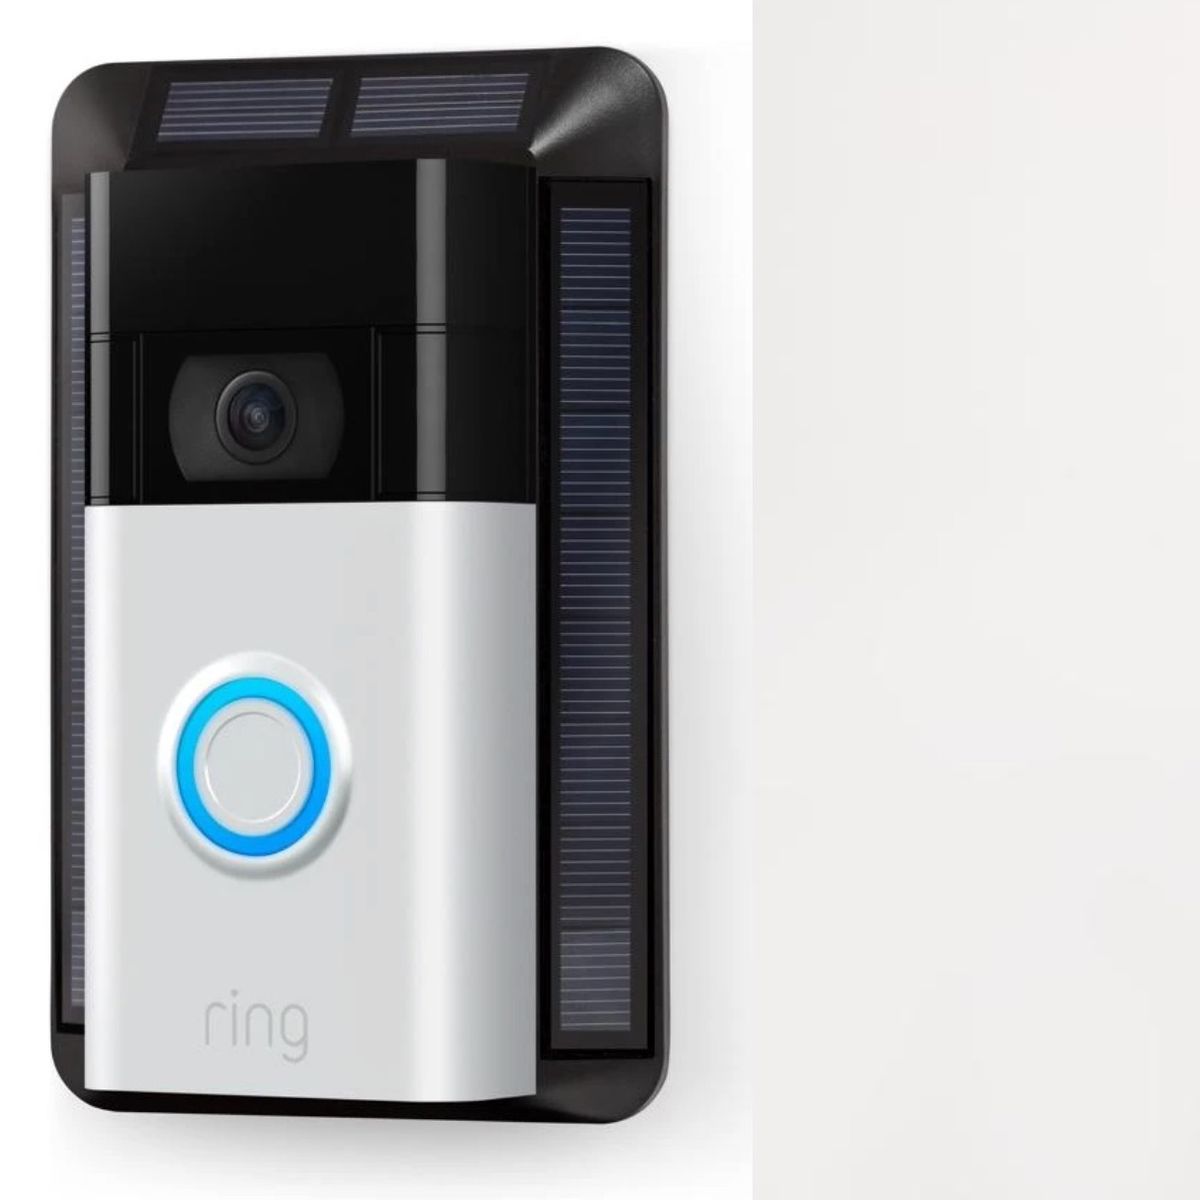 Ring Smart Doorbell Setup for iOS - Ace Hardware 